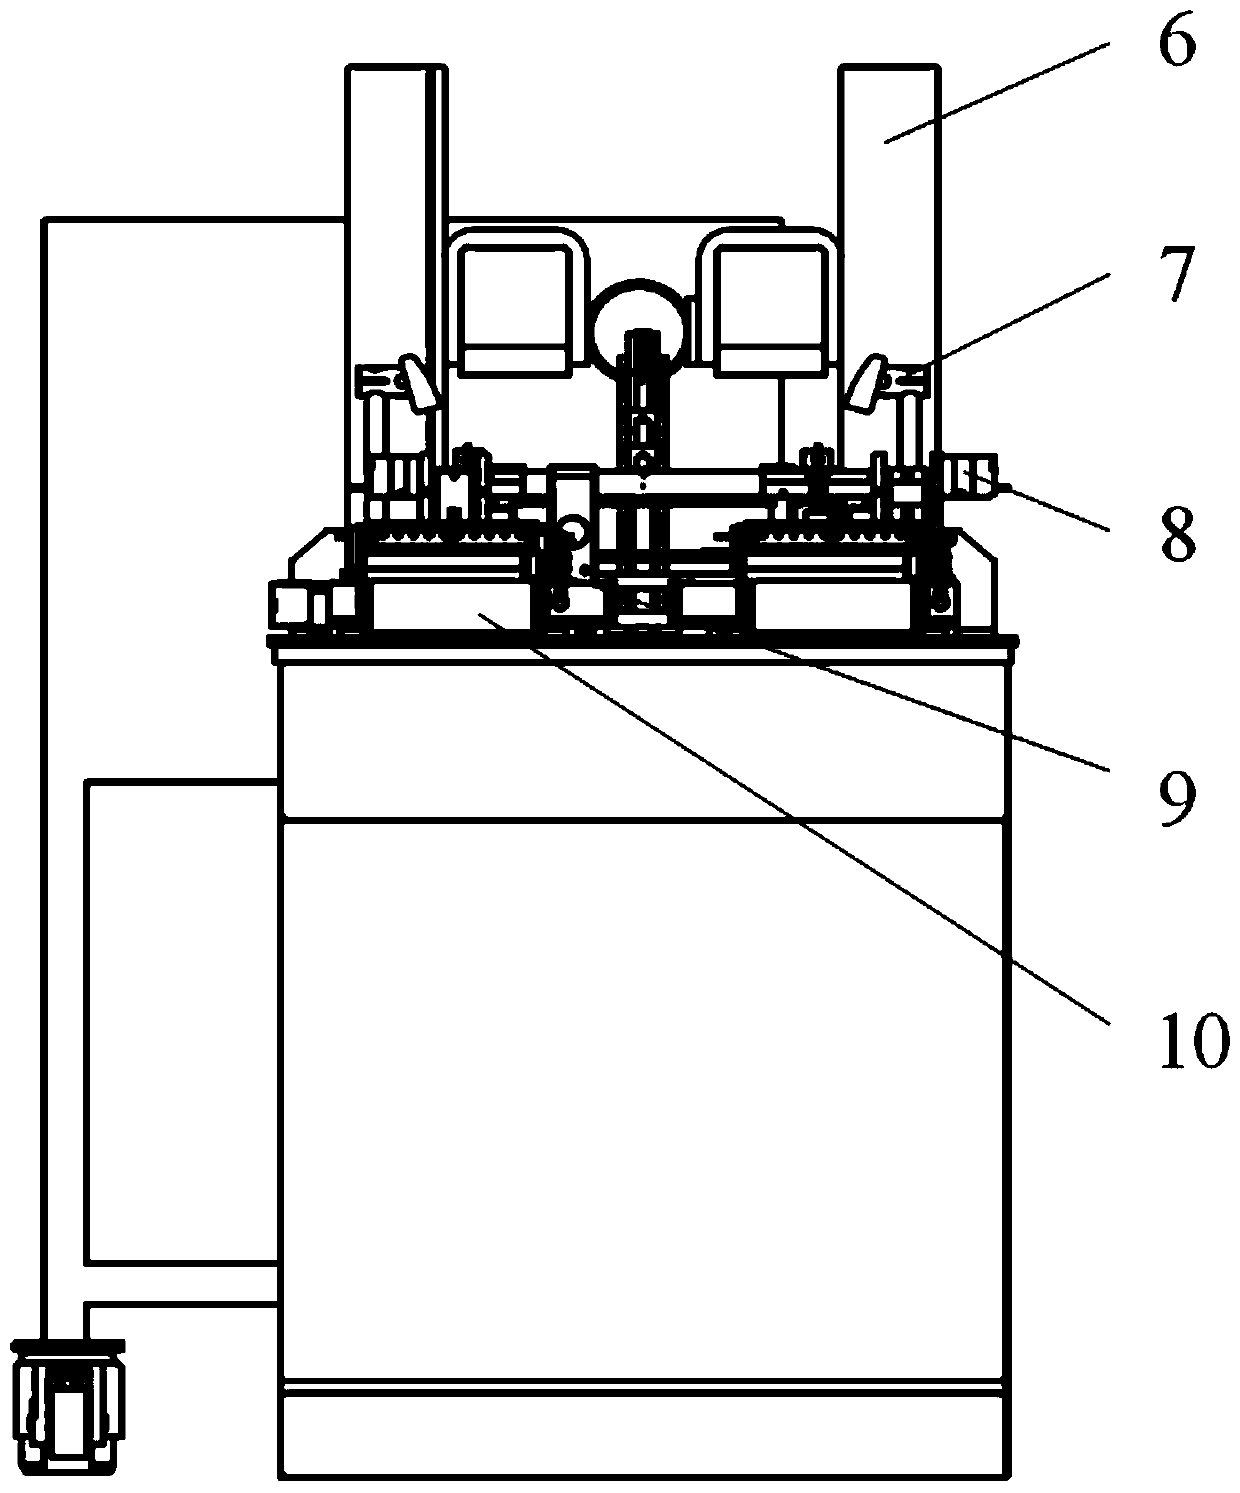 Full-automatic double-station laser marking device and method